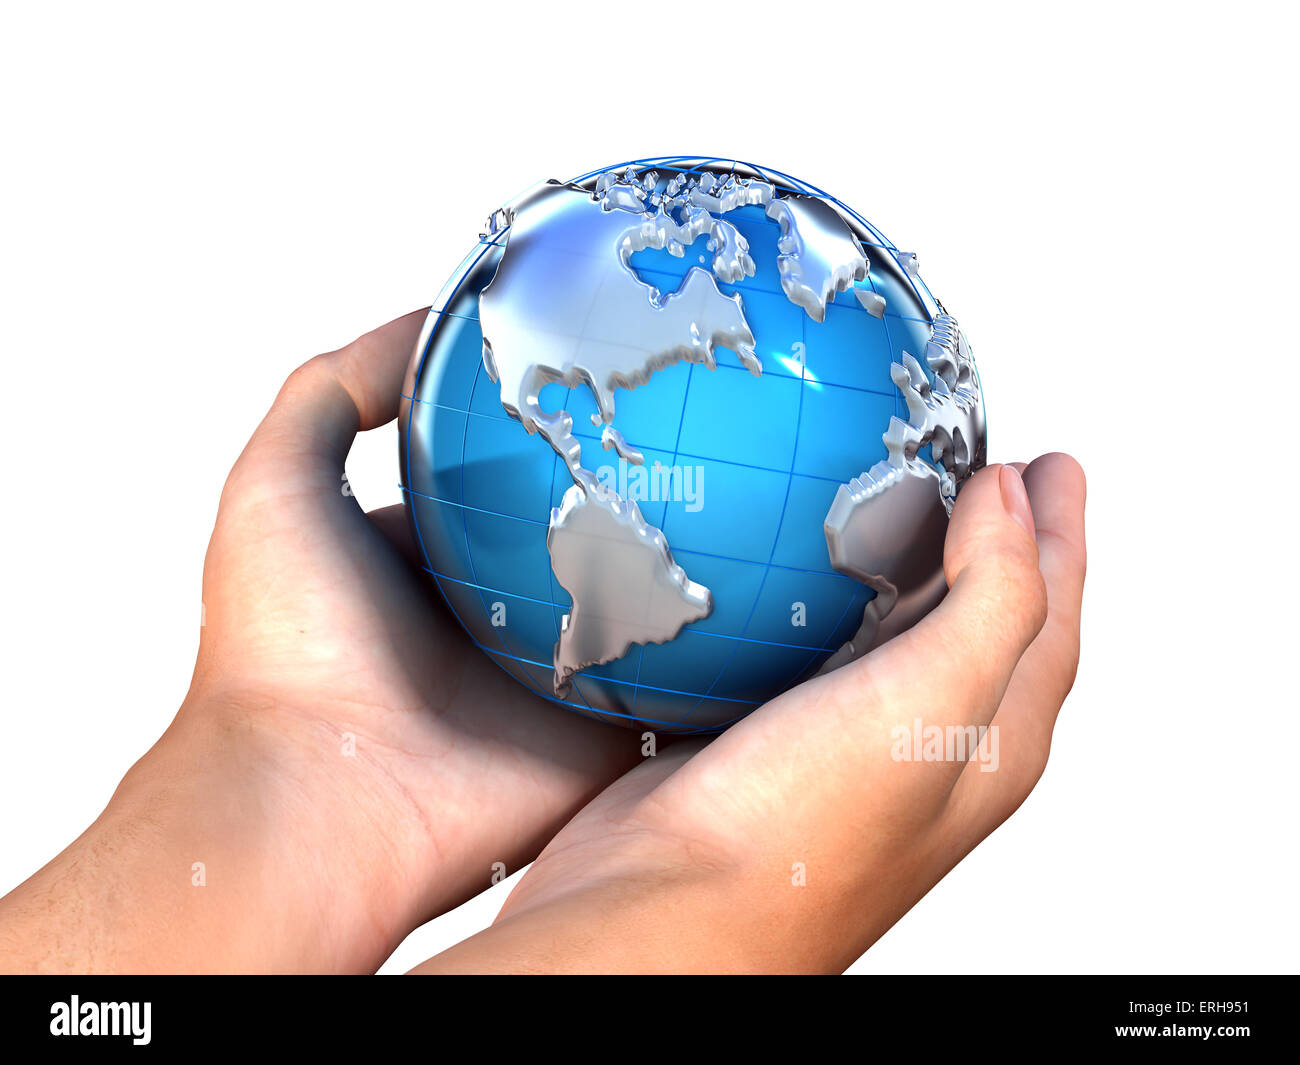 Hands grasping the blue globe Stock Photo